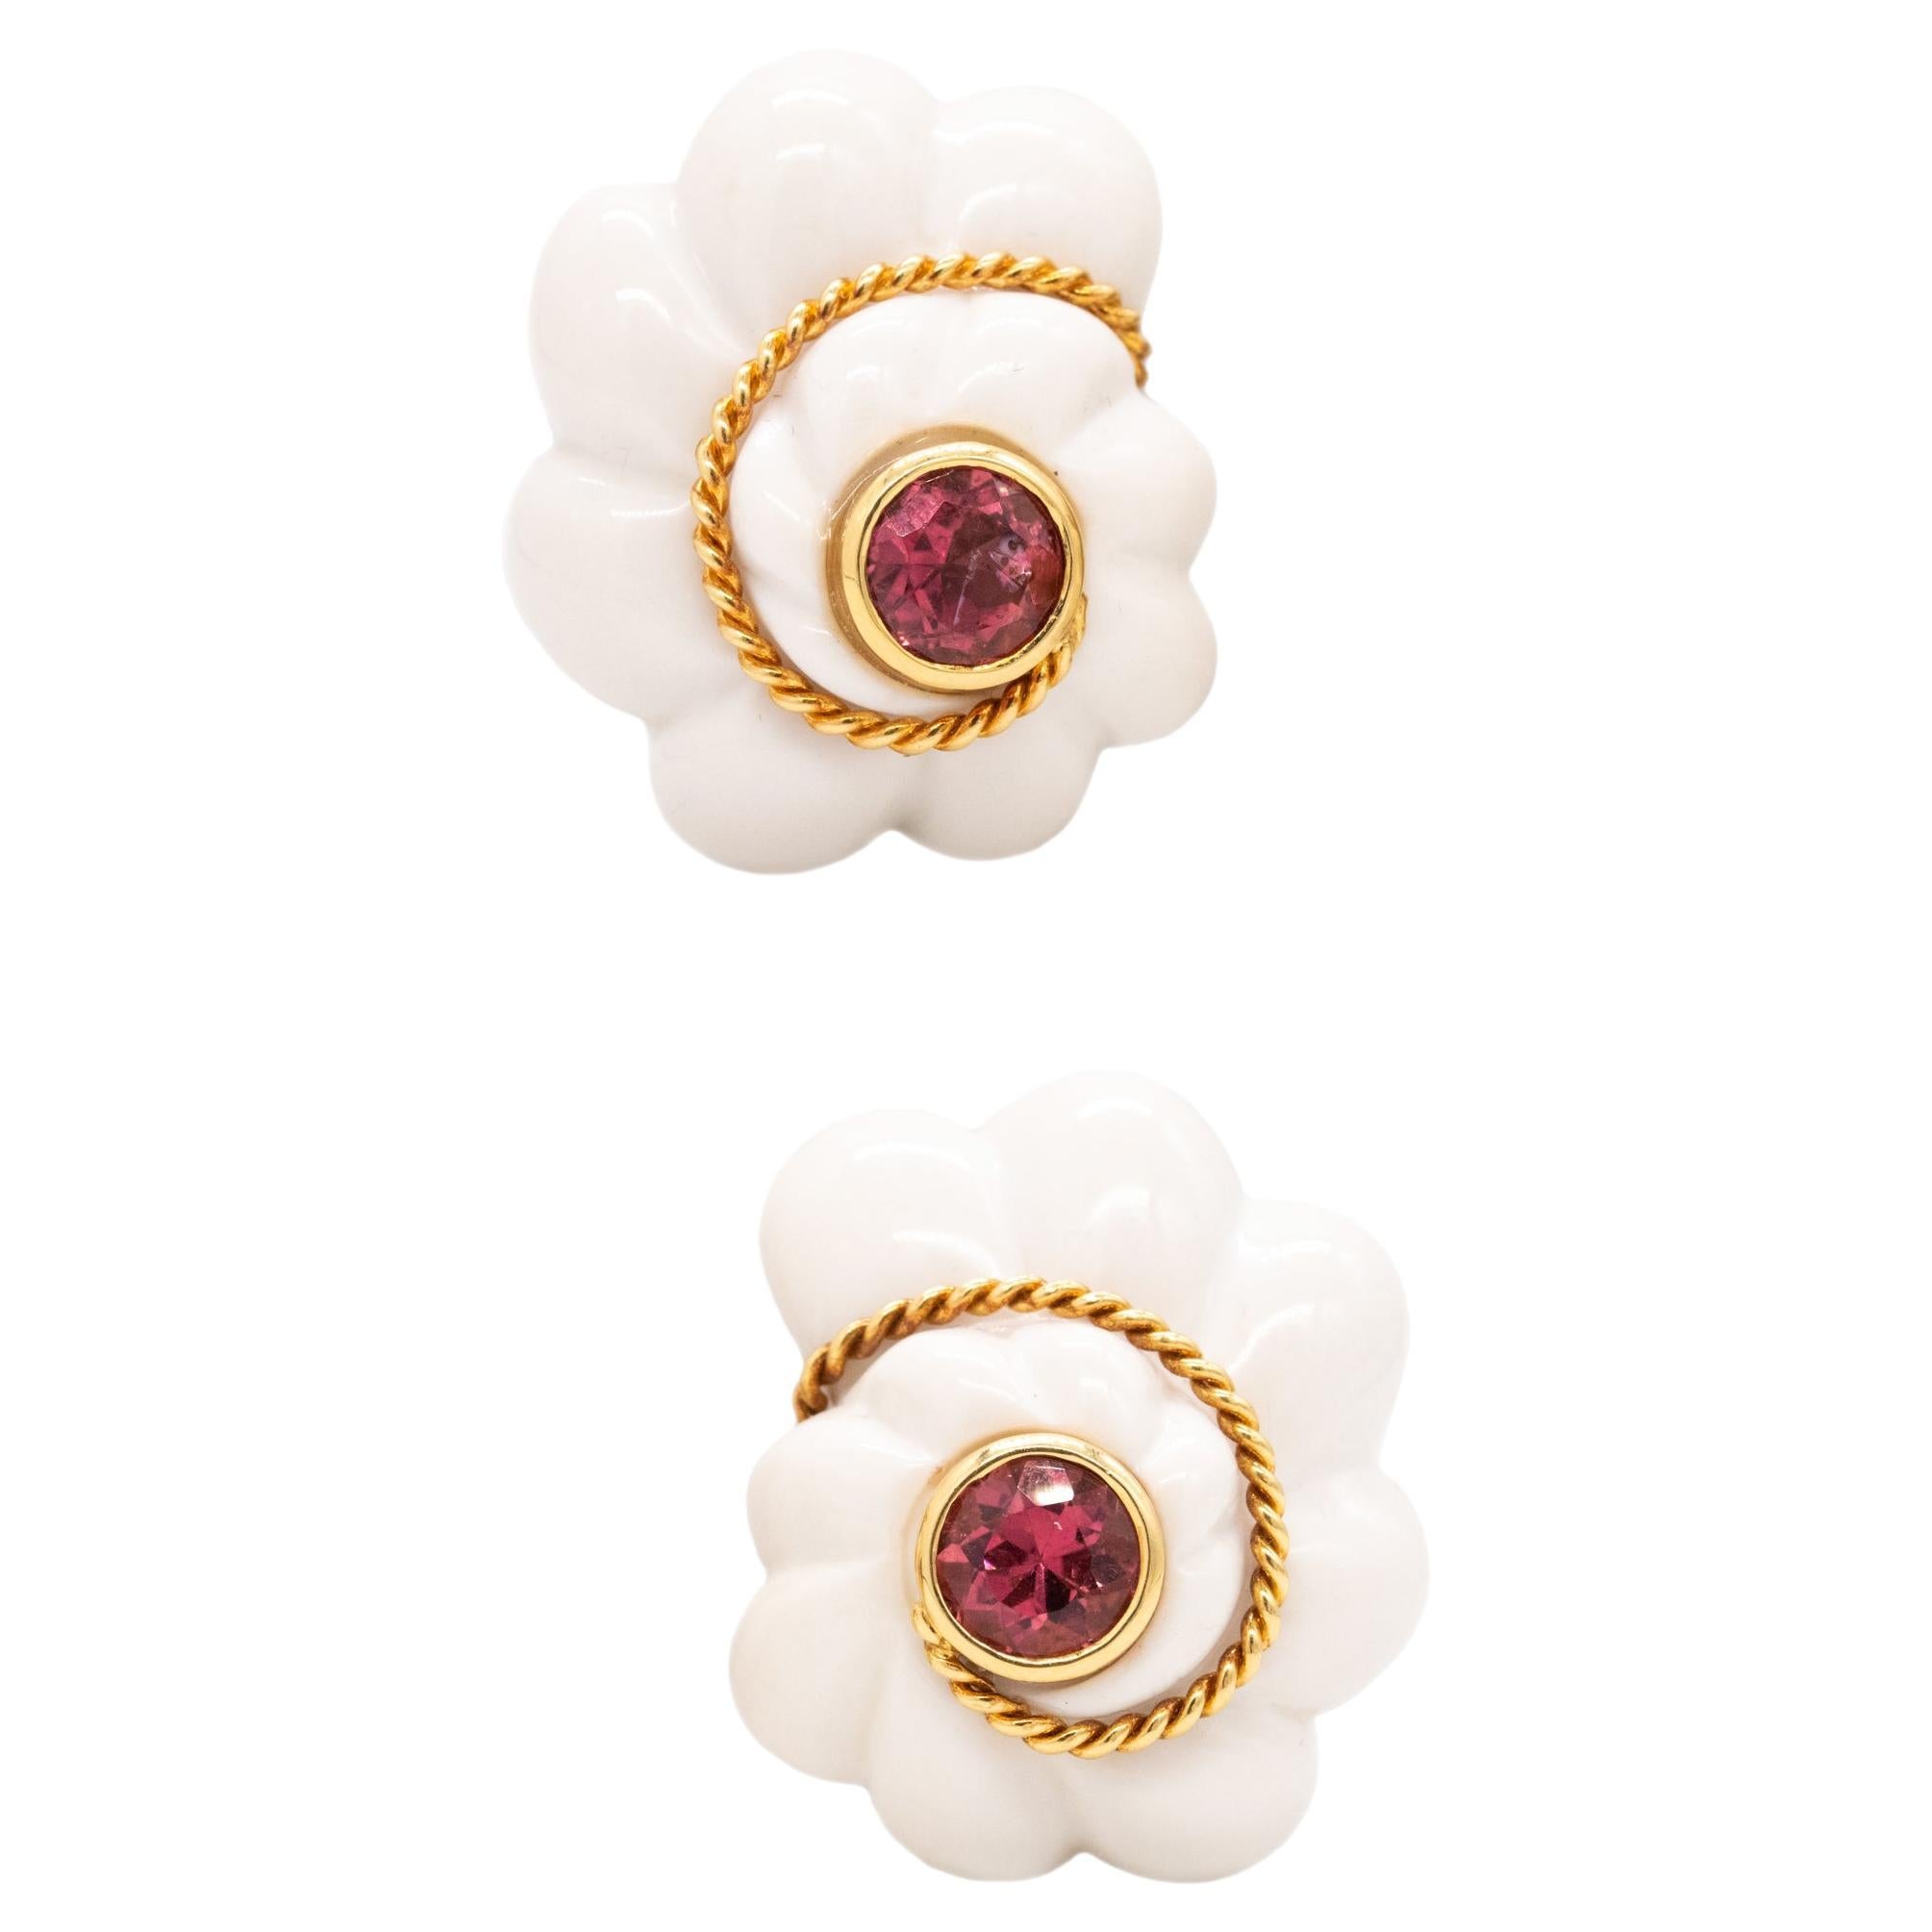 Valentin Magro 18Kt Gold Earrings 74.6 Cts In Rubellite And Cacholong White Opal